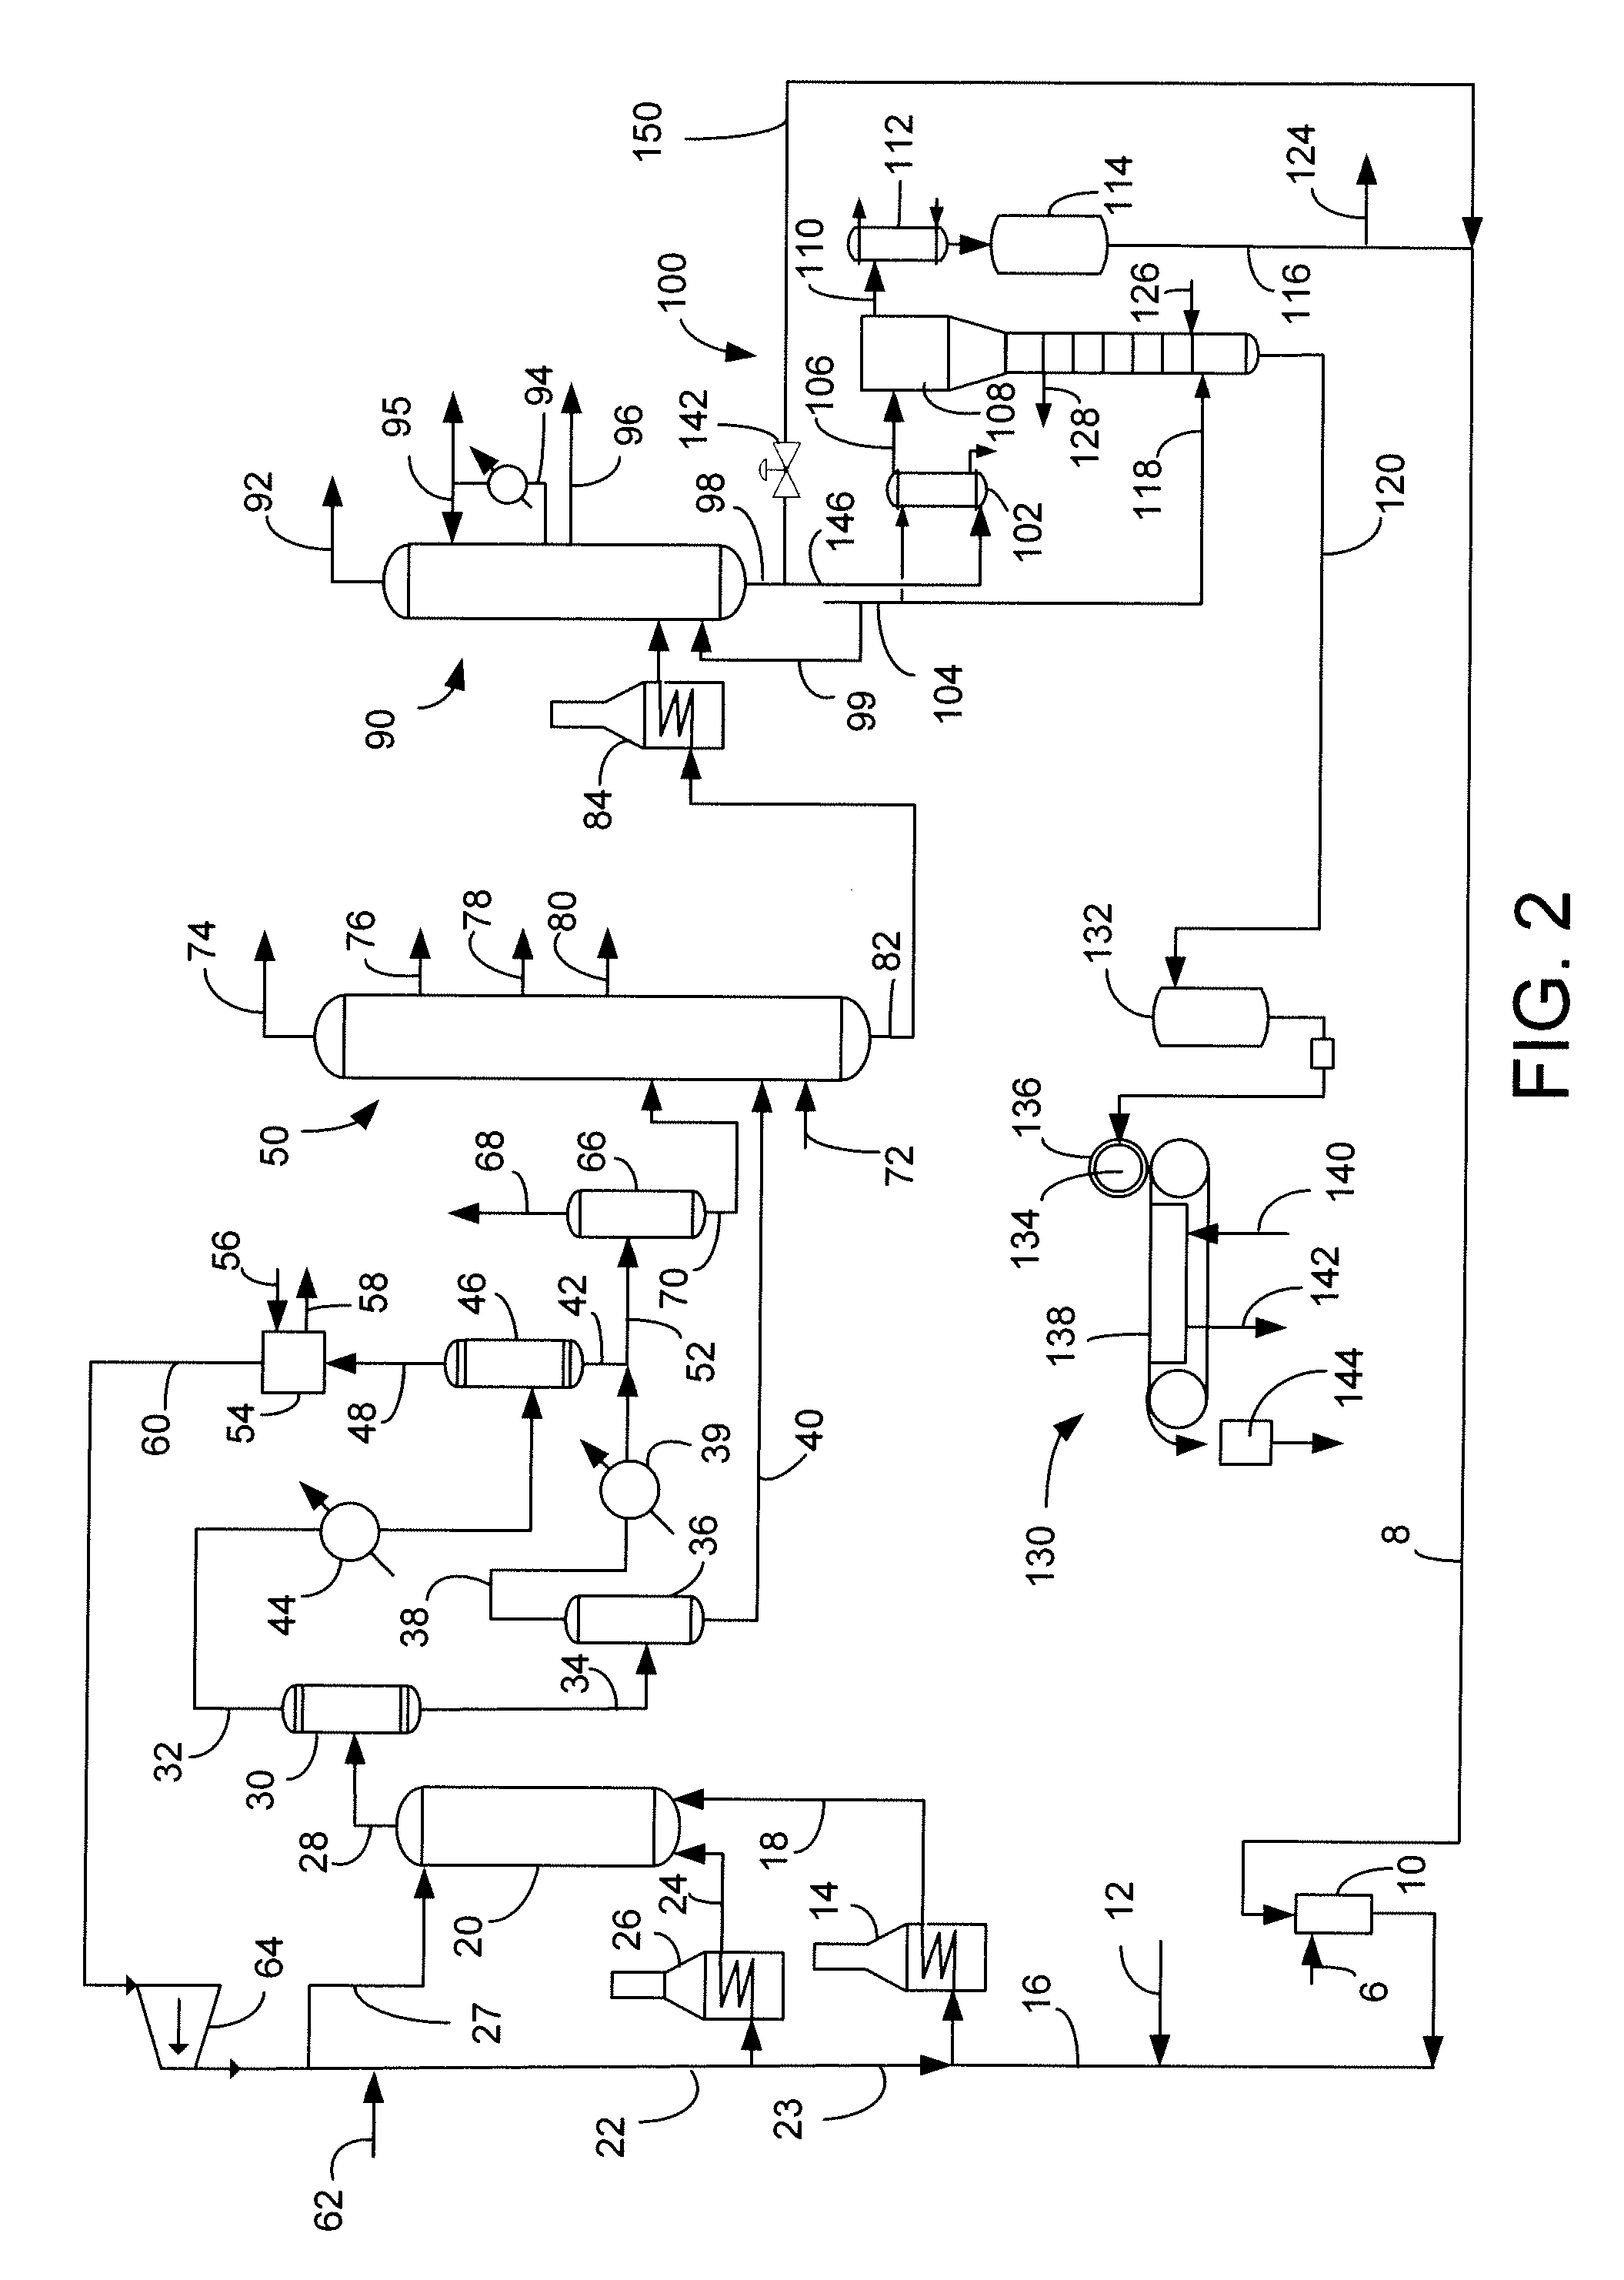 Process for separating pitch from slurry hydrocracked vacuum gas oil